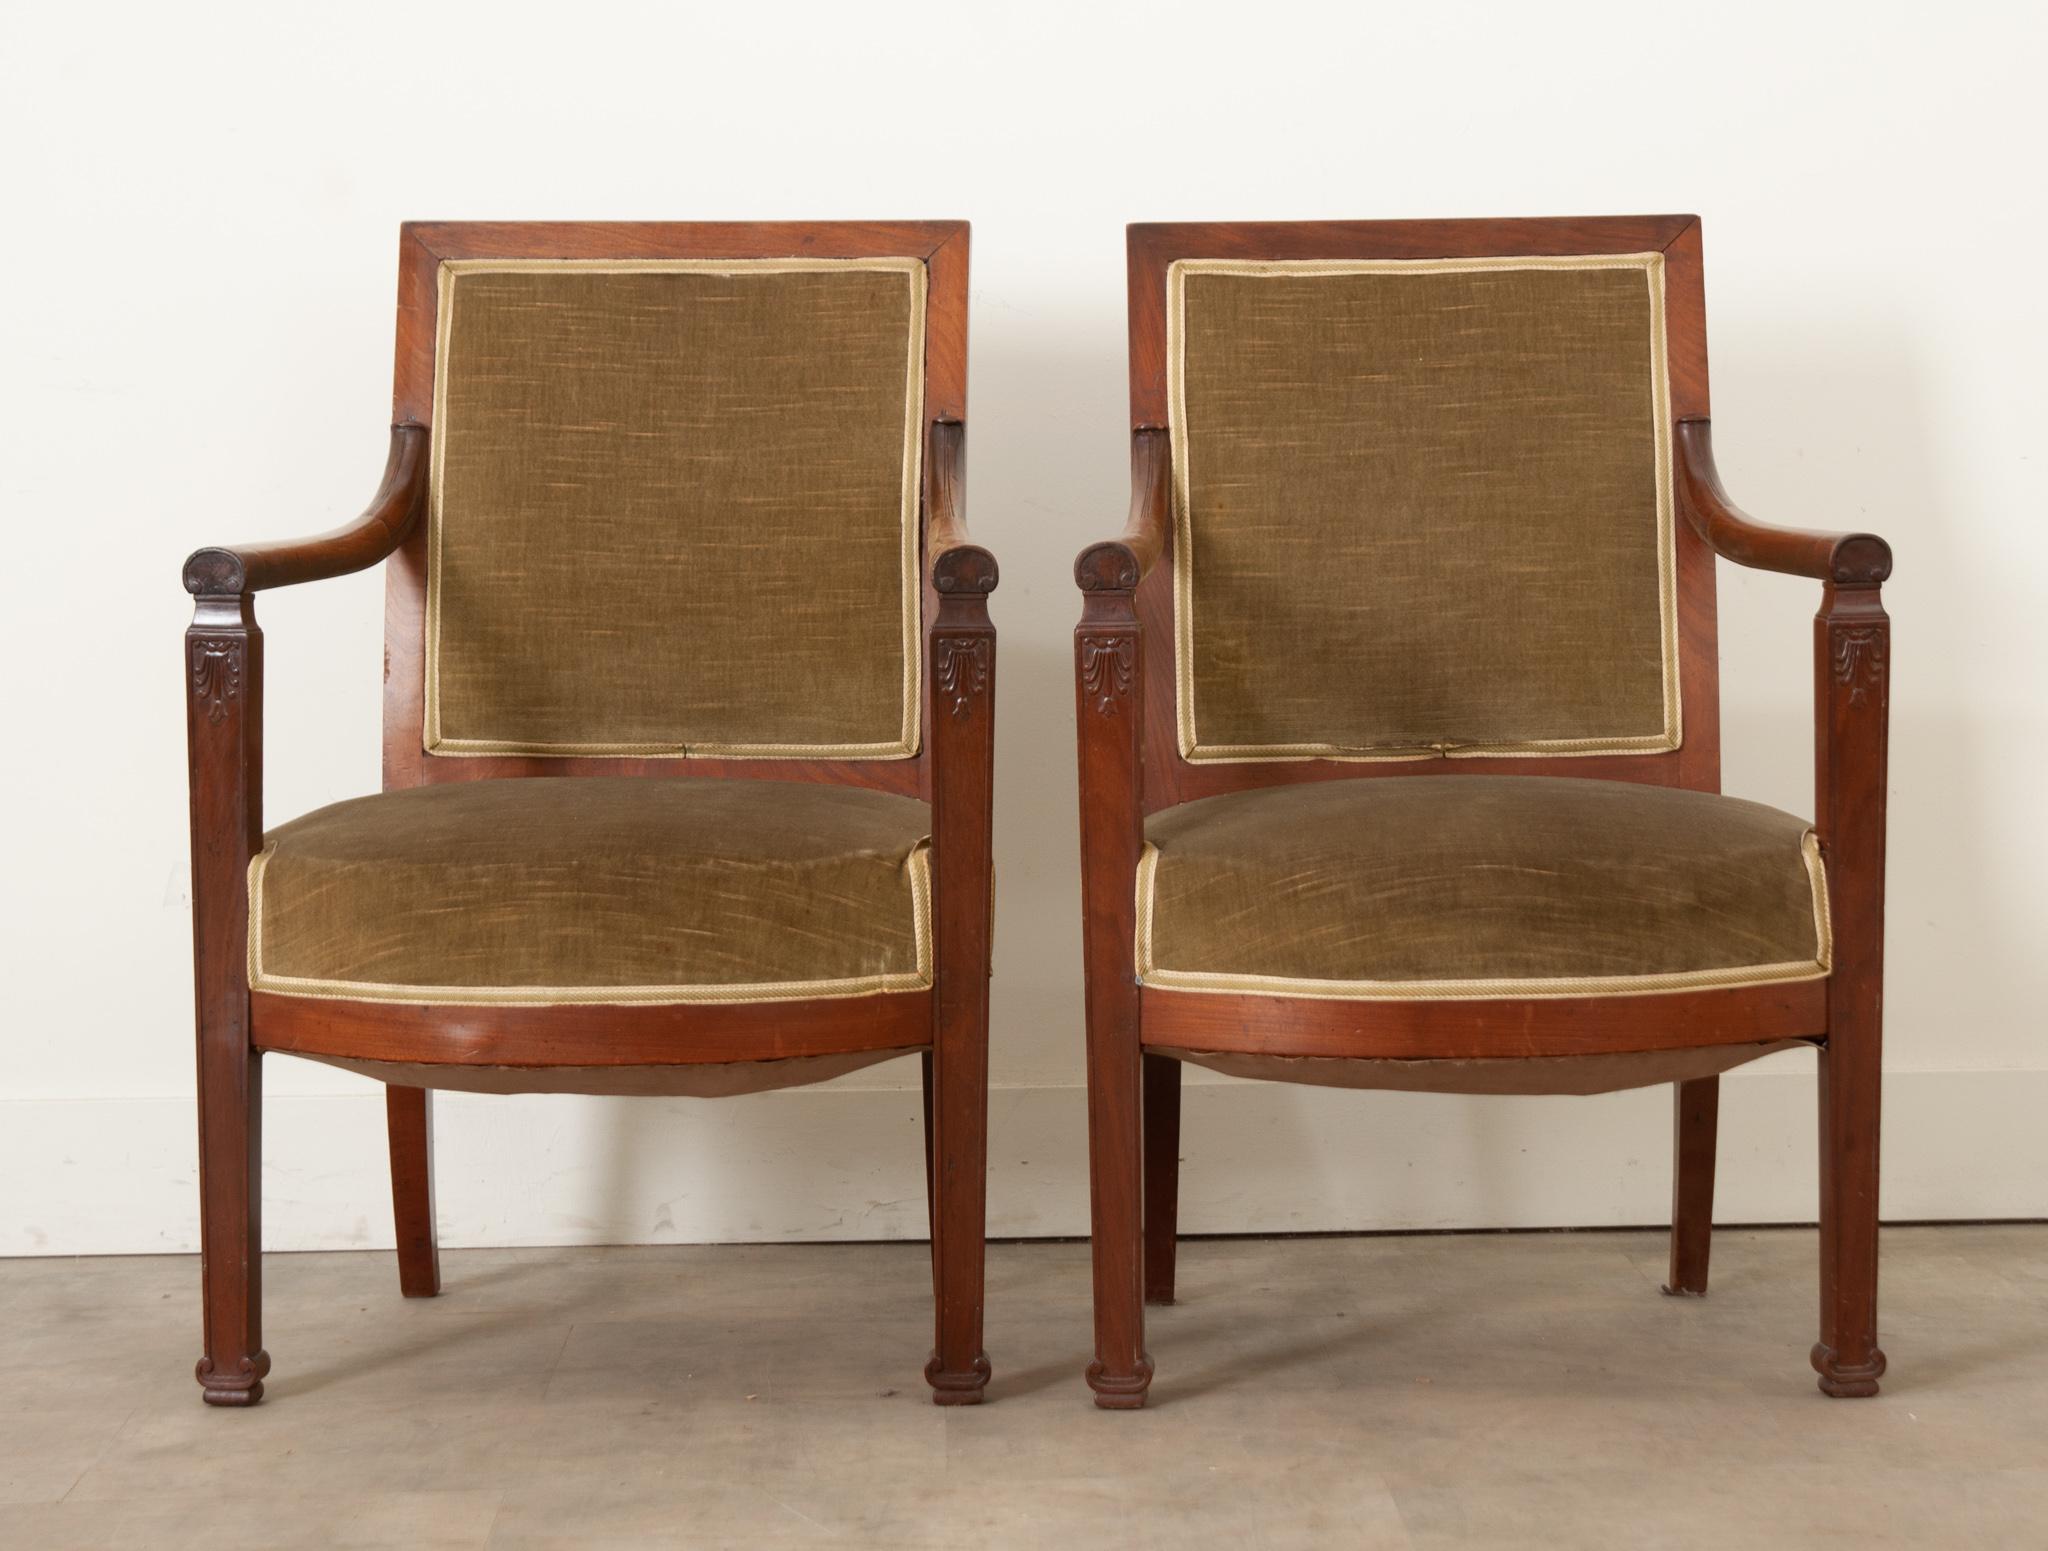 A handsome and sturdy pair of French Directoire square back fauteuils are tasteful and comfortable. These mahogany occasional chairs are upholstered in a worn green velvet and accented with gold tape trim. The arms are rounded and smooth and attach